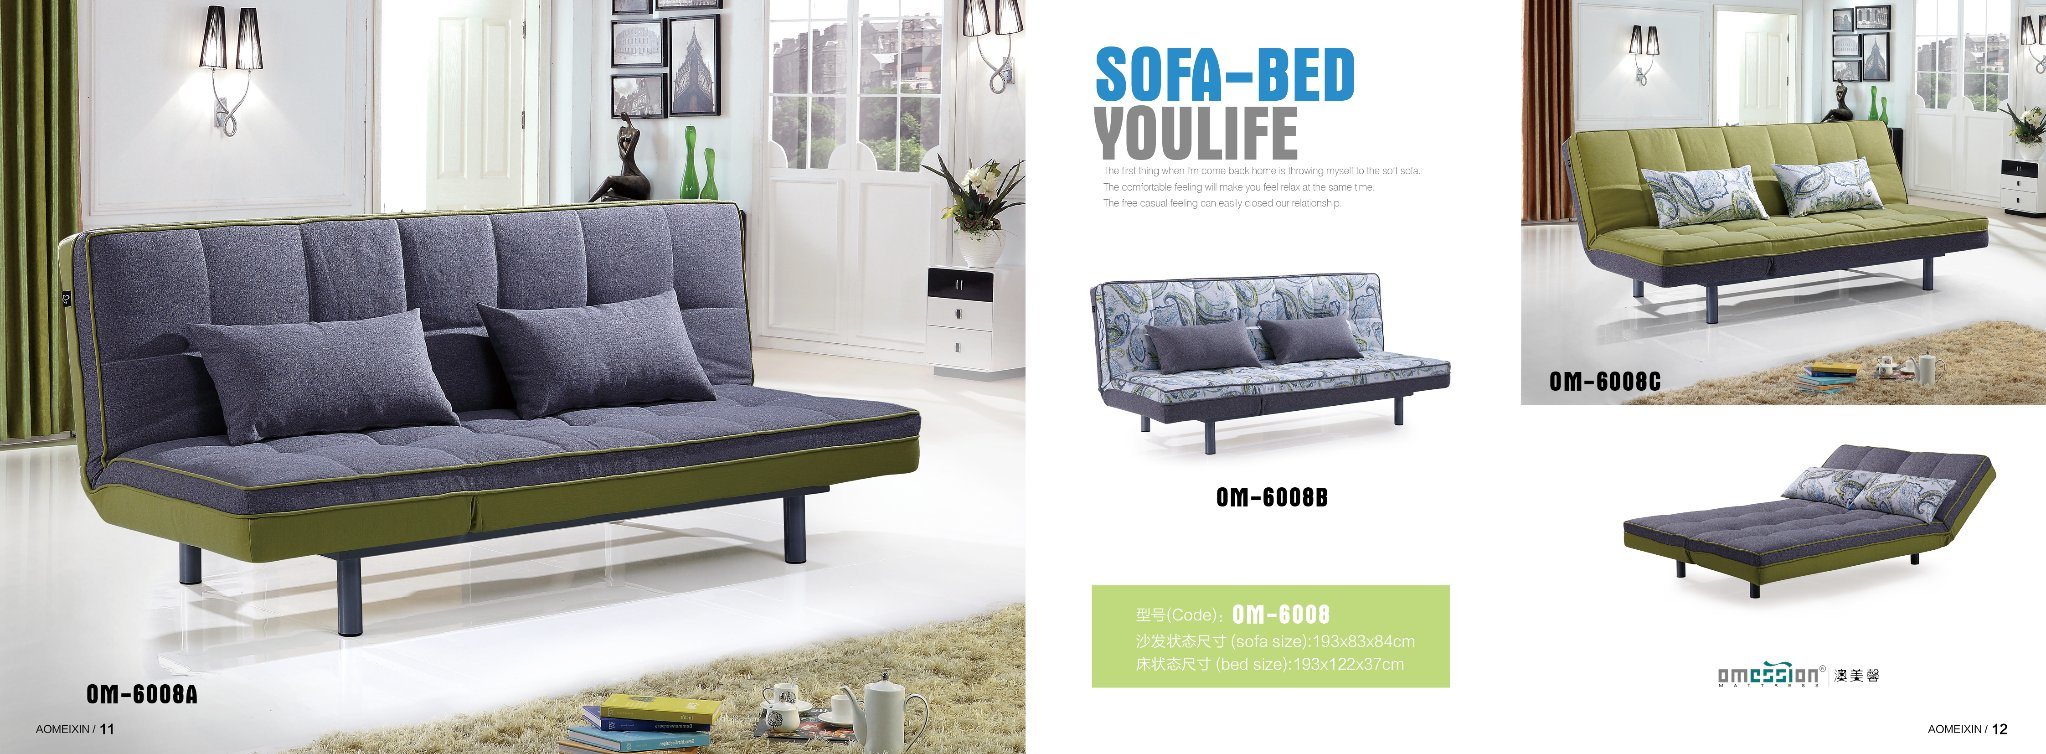 Fabric, Functional, Leisure, Home, Leisure, Sofa Bed